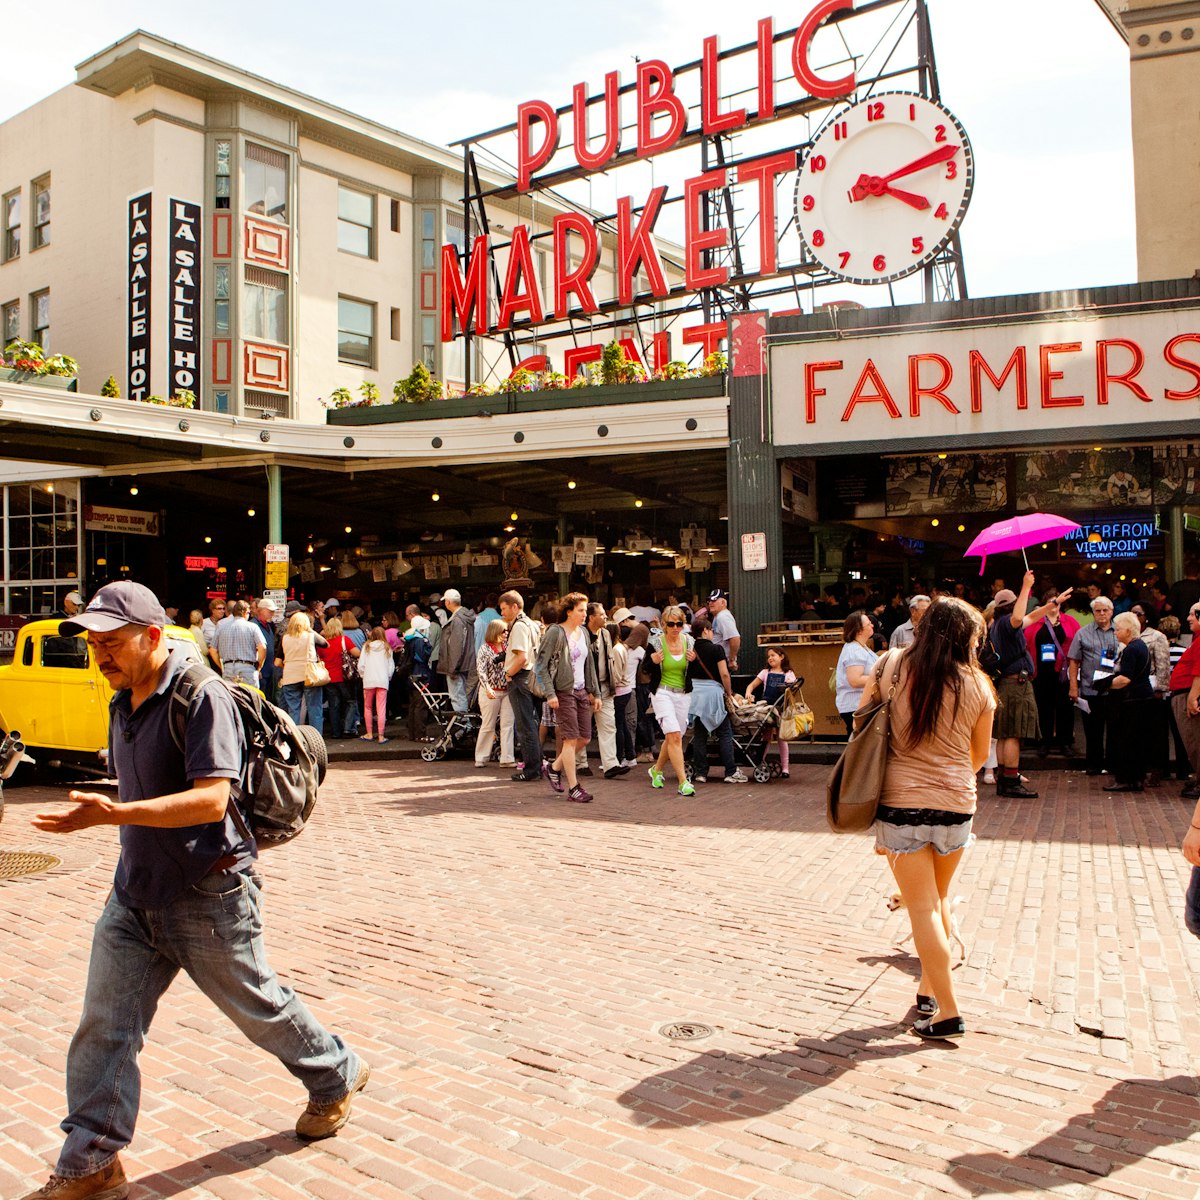 458119129
Building Exterior; Color Image; Concepts; Consumerism; Customer; Editorial; Famous Place; Horizontal; International Landmark; Market; Outdoors; People; Photography; Pike Place Market; Seattle; Shopping; Travel locations; USA; Walking; Washington State;
June 17, 2011: a crowd of people at Seattle's Pike Place market.